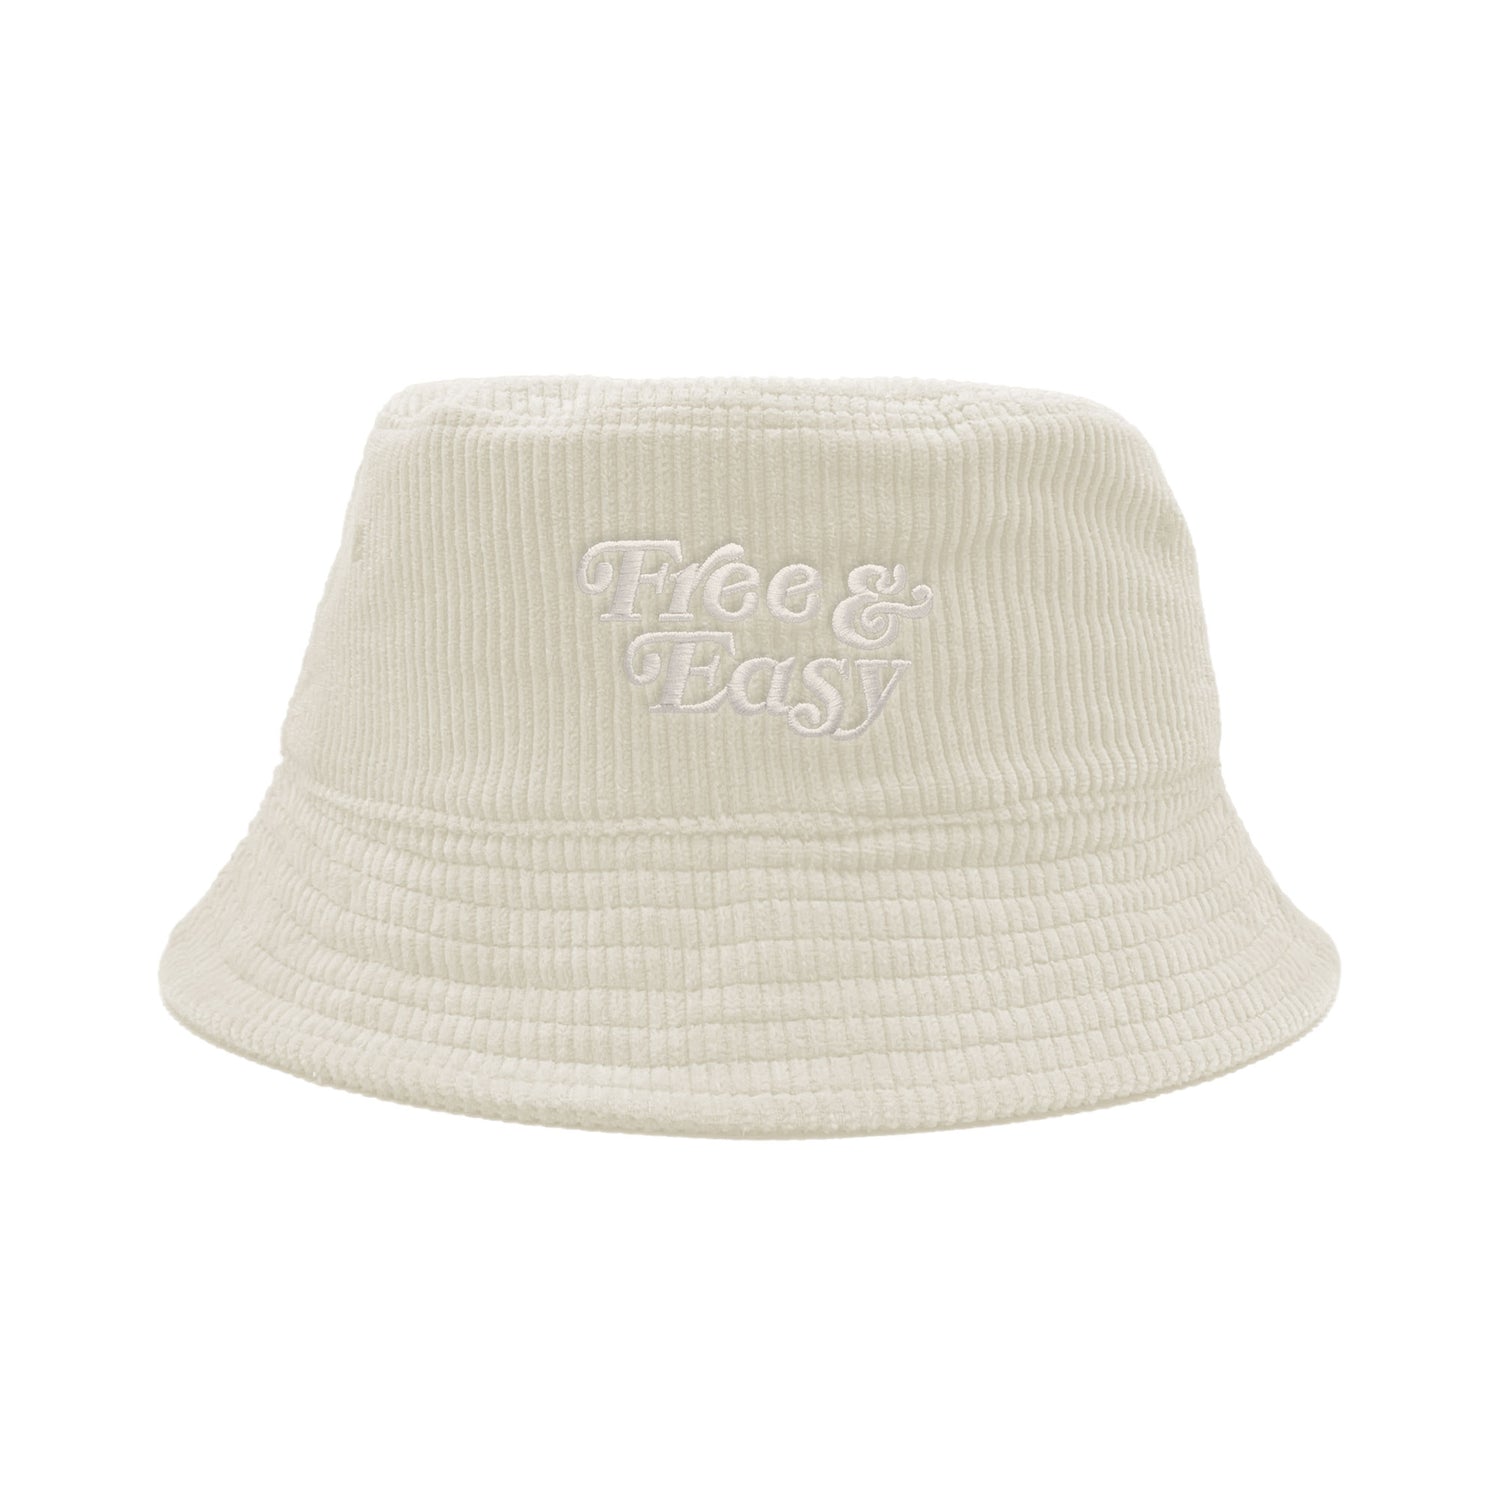 Free & Easy Don't Trip Fat Corduroy Bucket Hat in cream with white Free & Easy embroidery on a white background - Free & Easy